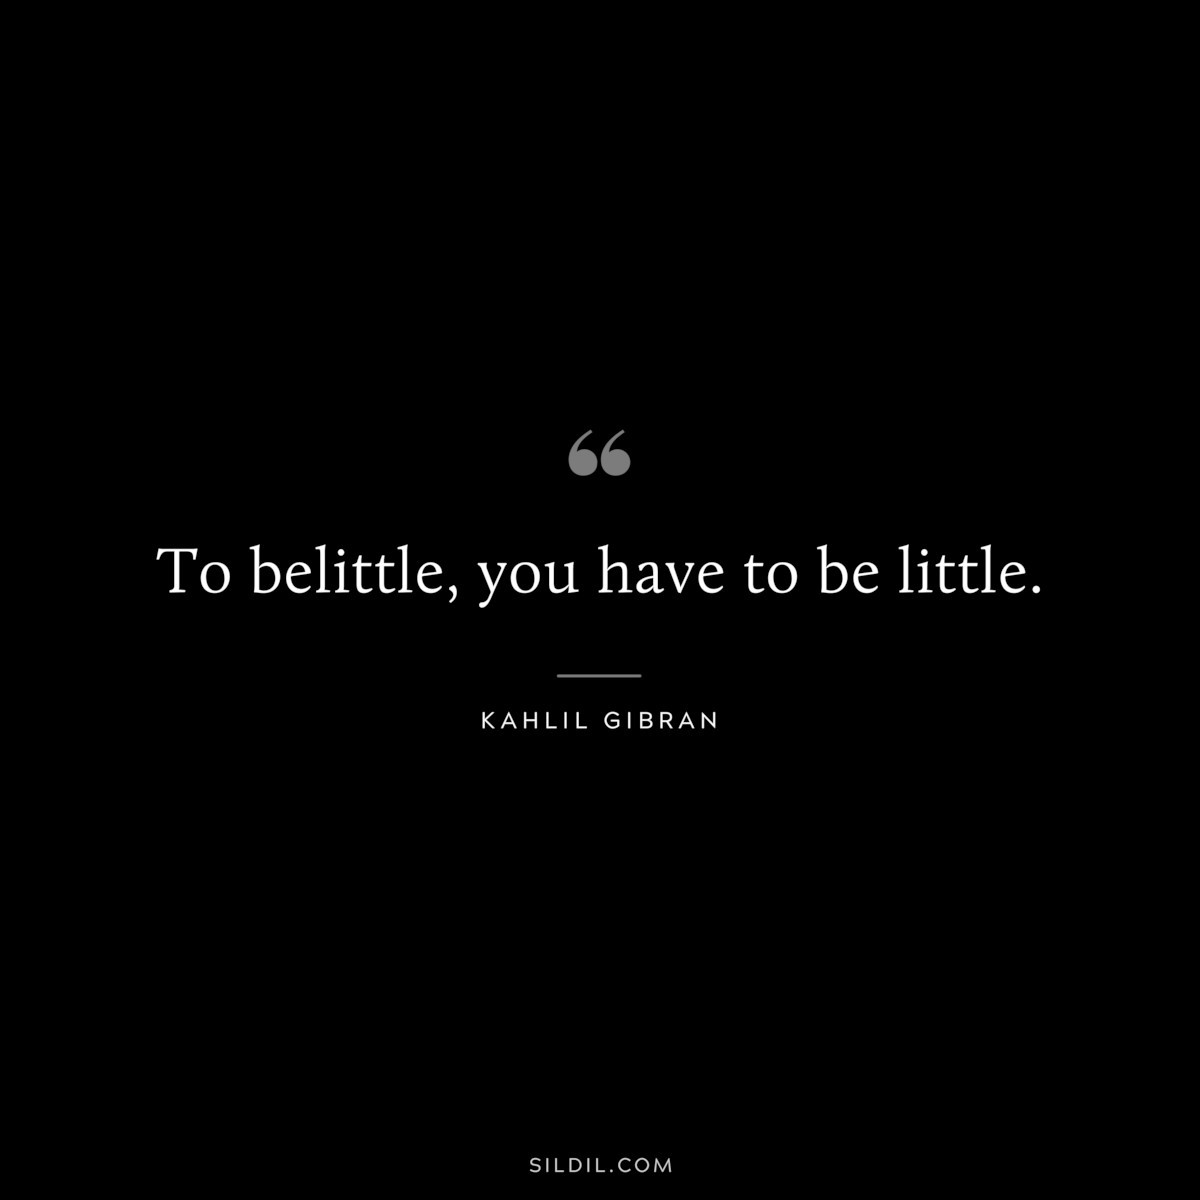 To belittle, you have to be little. ― Kahlil Gibran